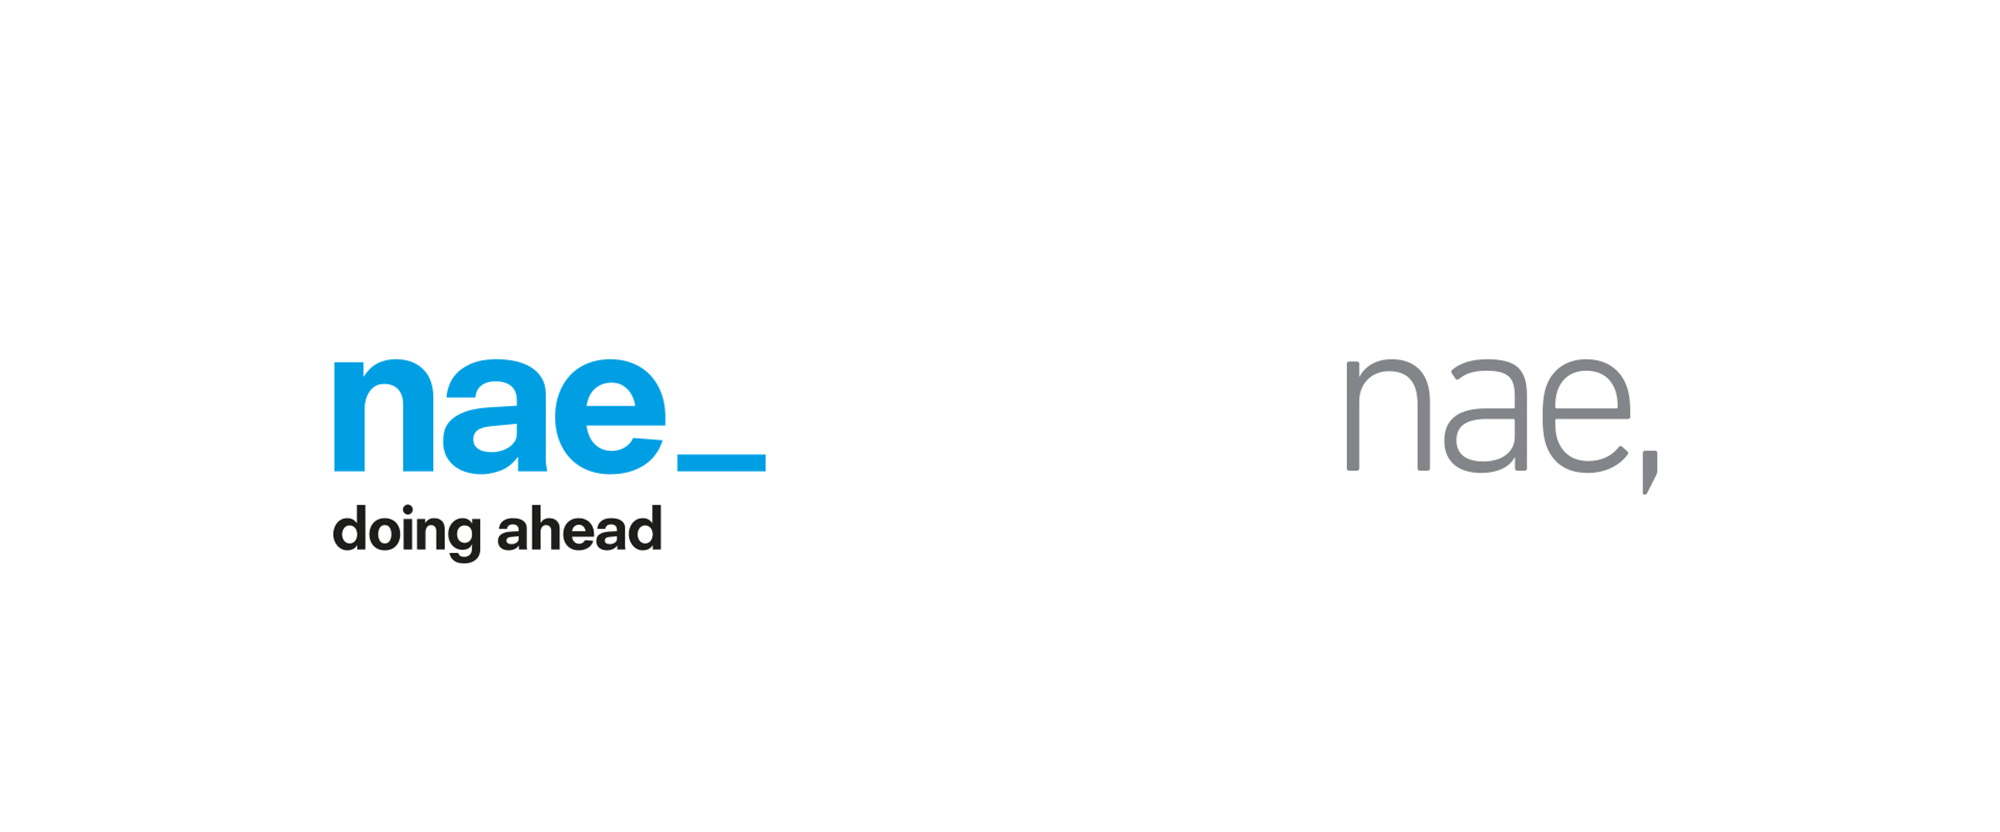 New Logo and Identity for Nae by Soluble